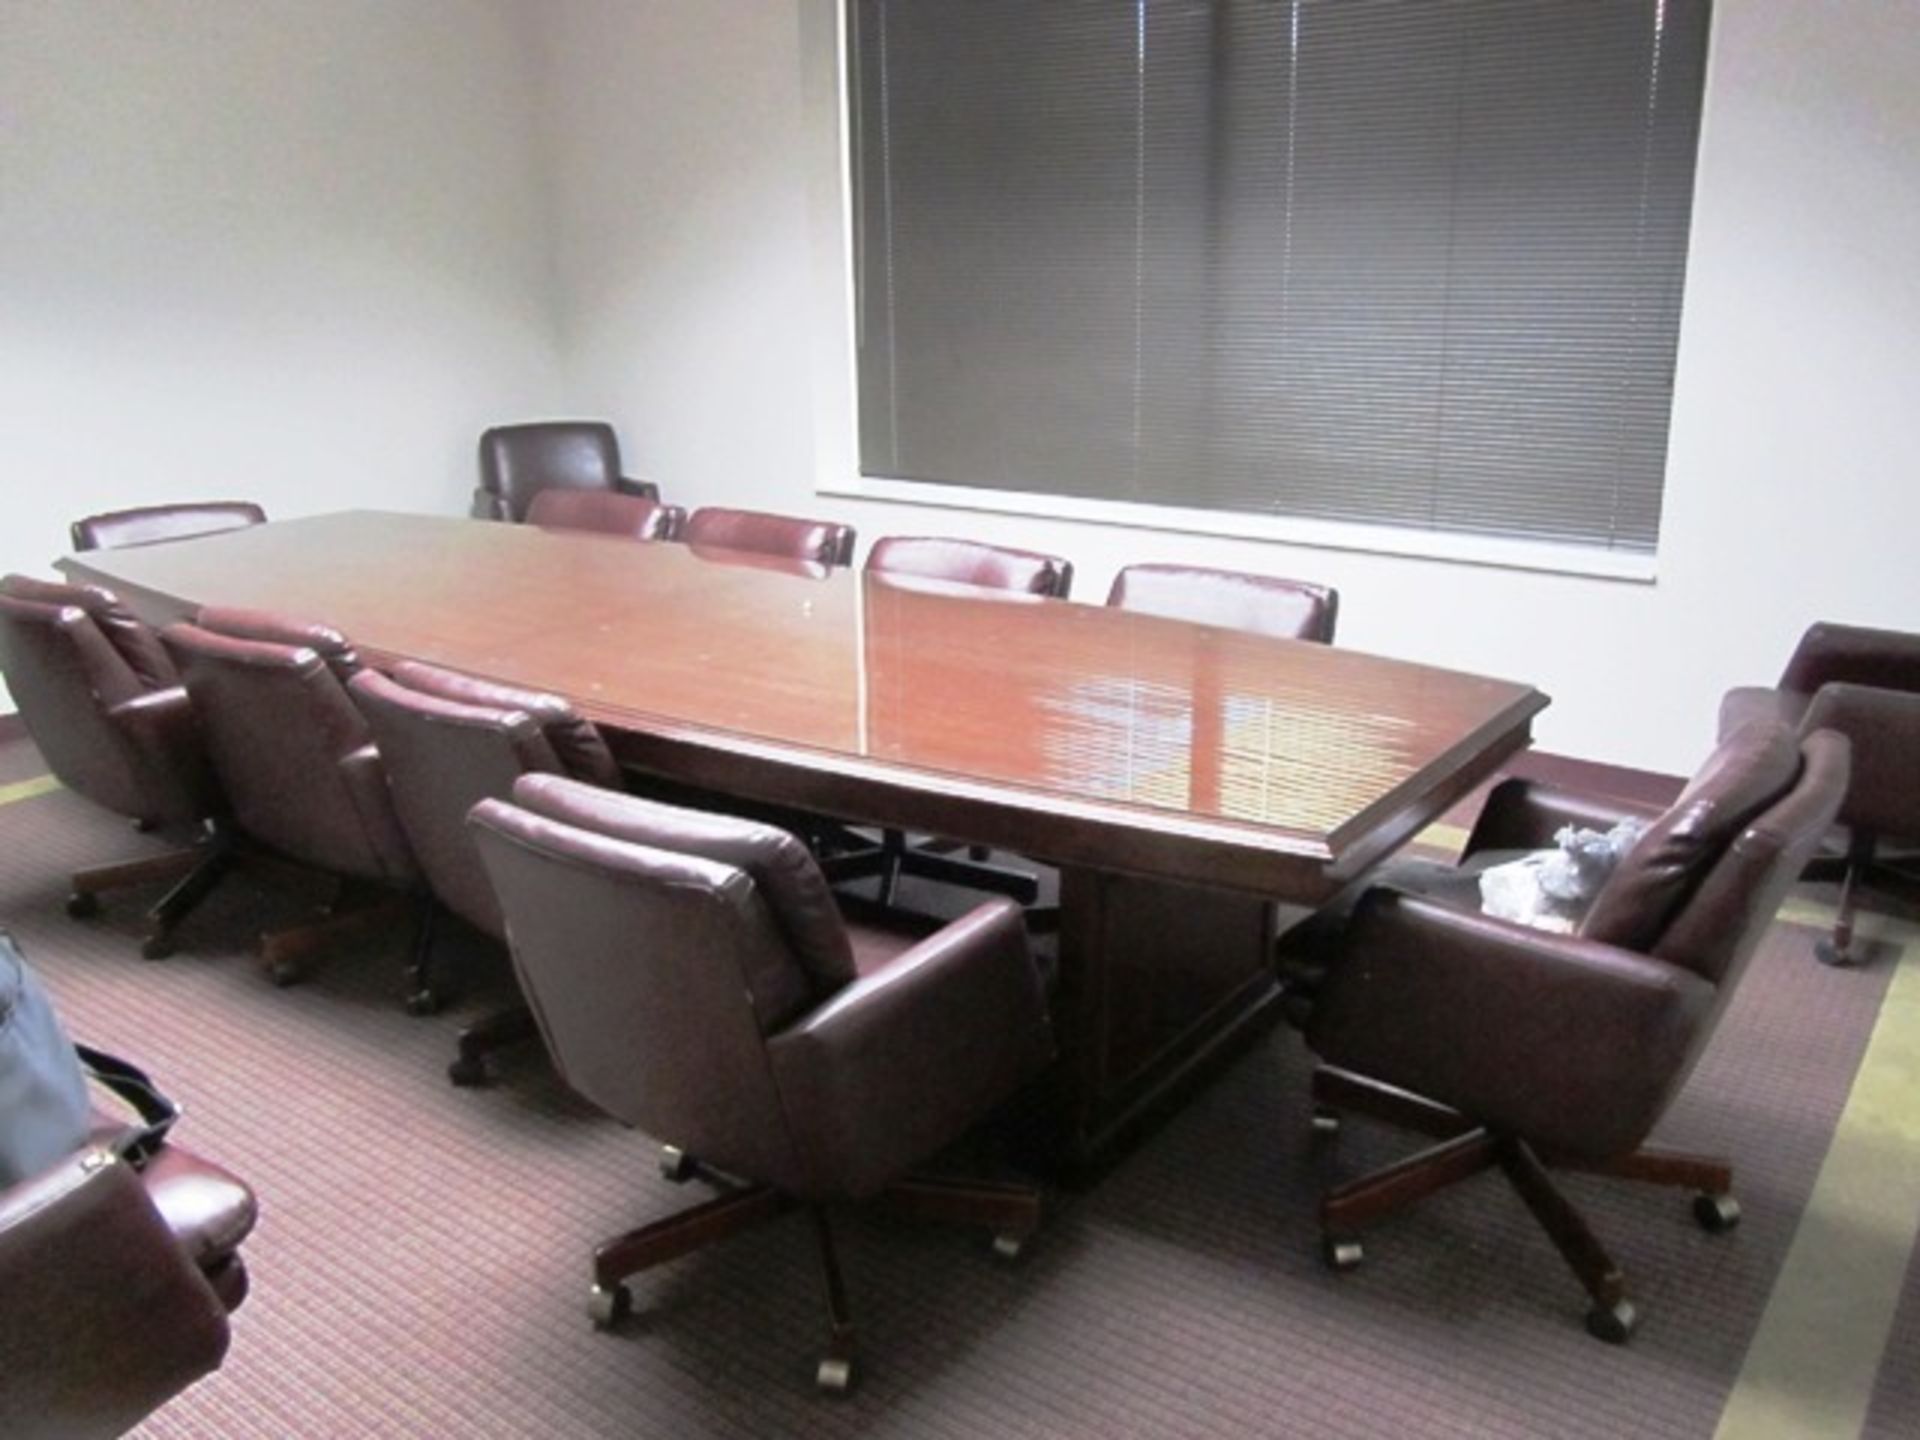 Contents of Room consisting of 12' Conference Table with 10 Chairs, Credenza, Mitsubishi Projector